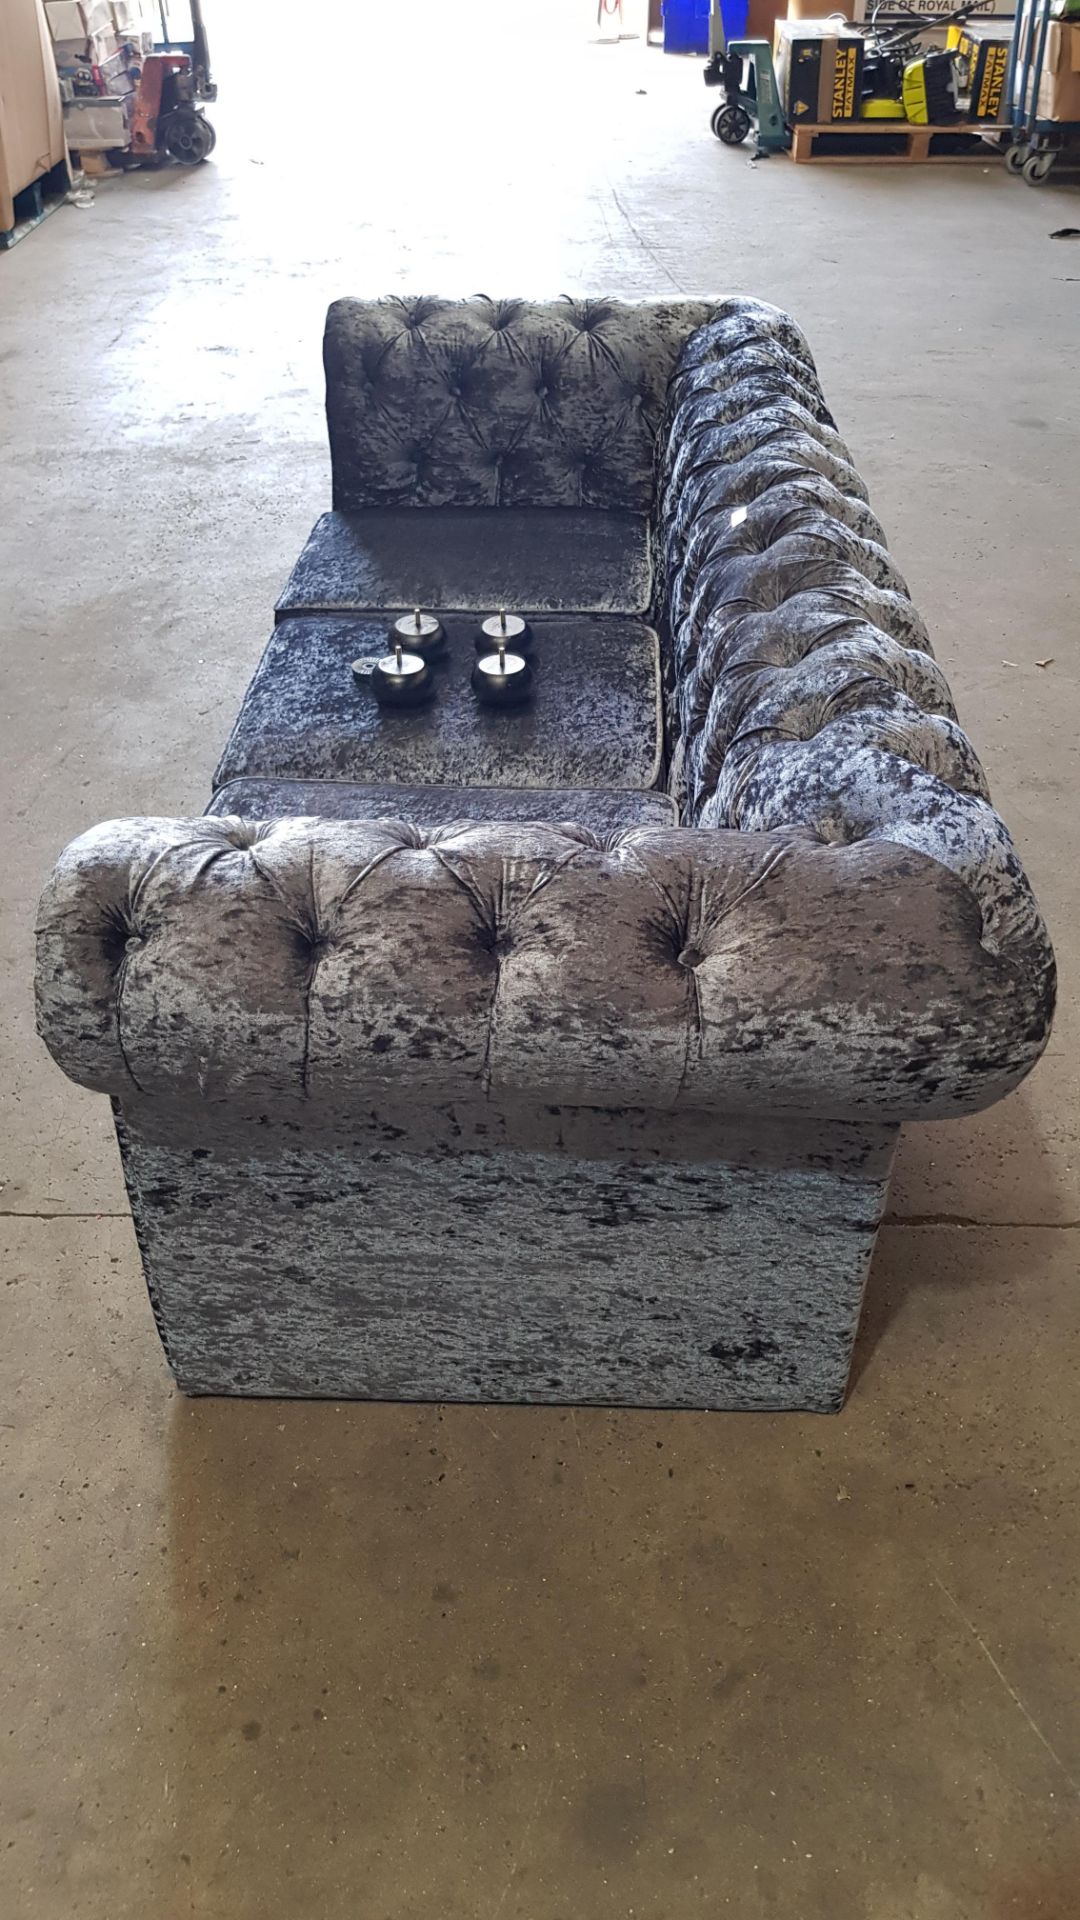 1x Chesterfield Crushed Velvet 3 Seater Sofa Petrol Blue RRP £450. (H)750 x (D)850 x (W)2000mm - Image 8 of 8